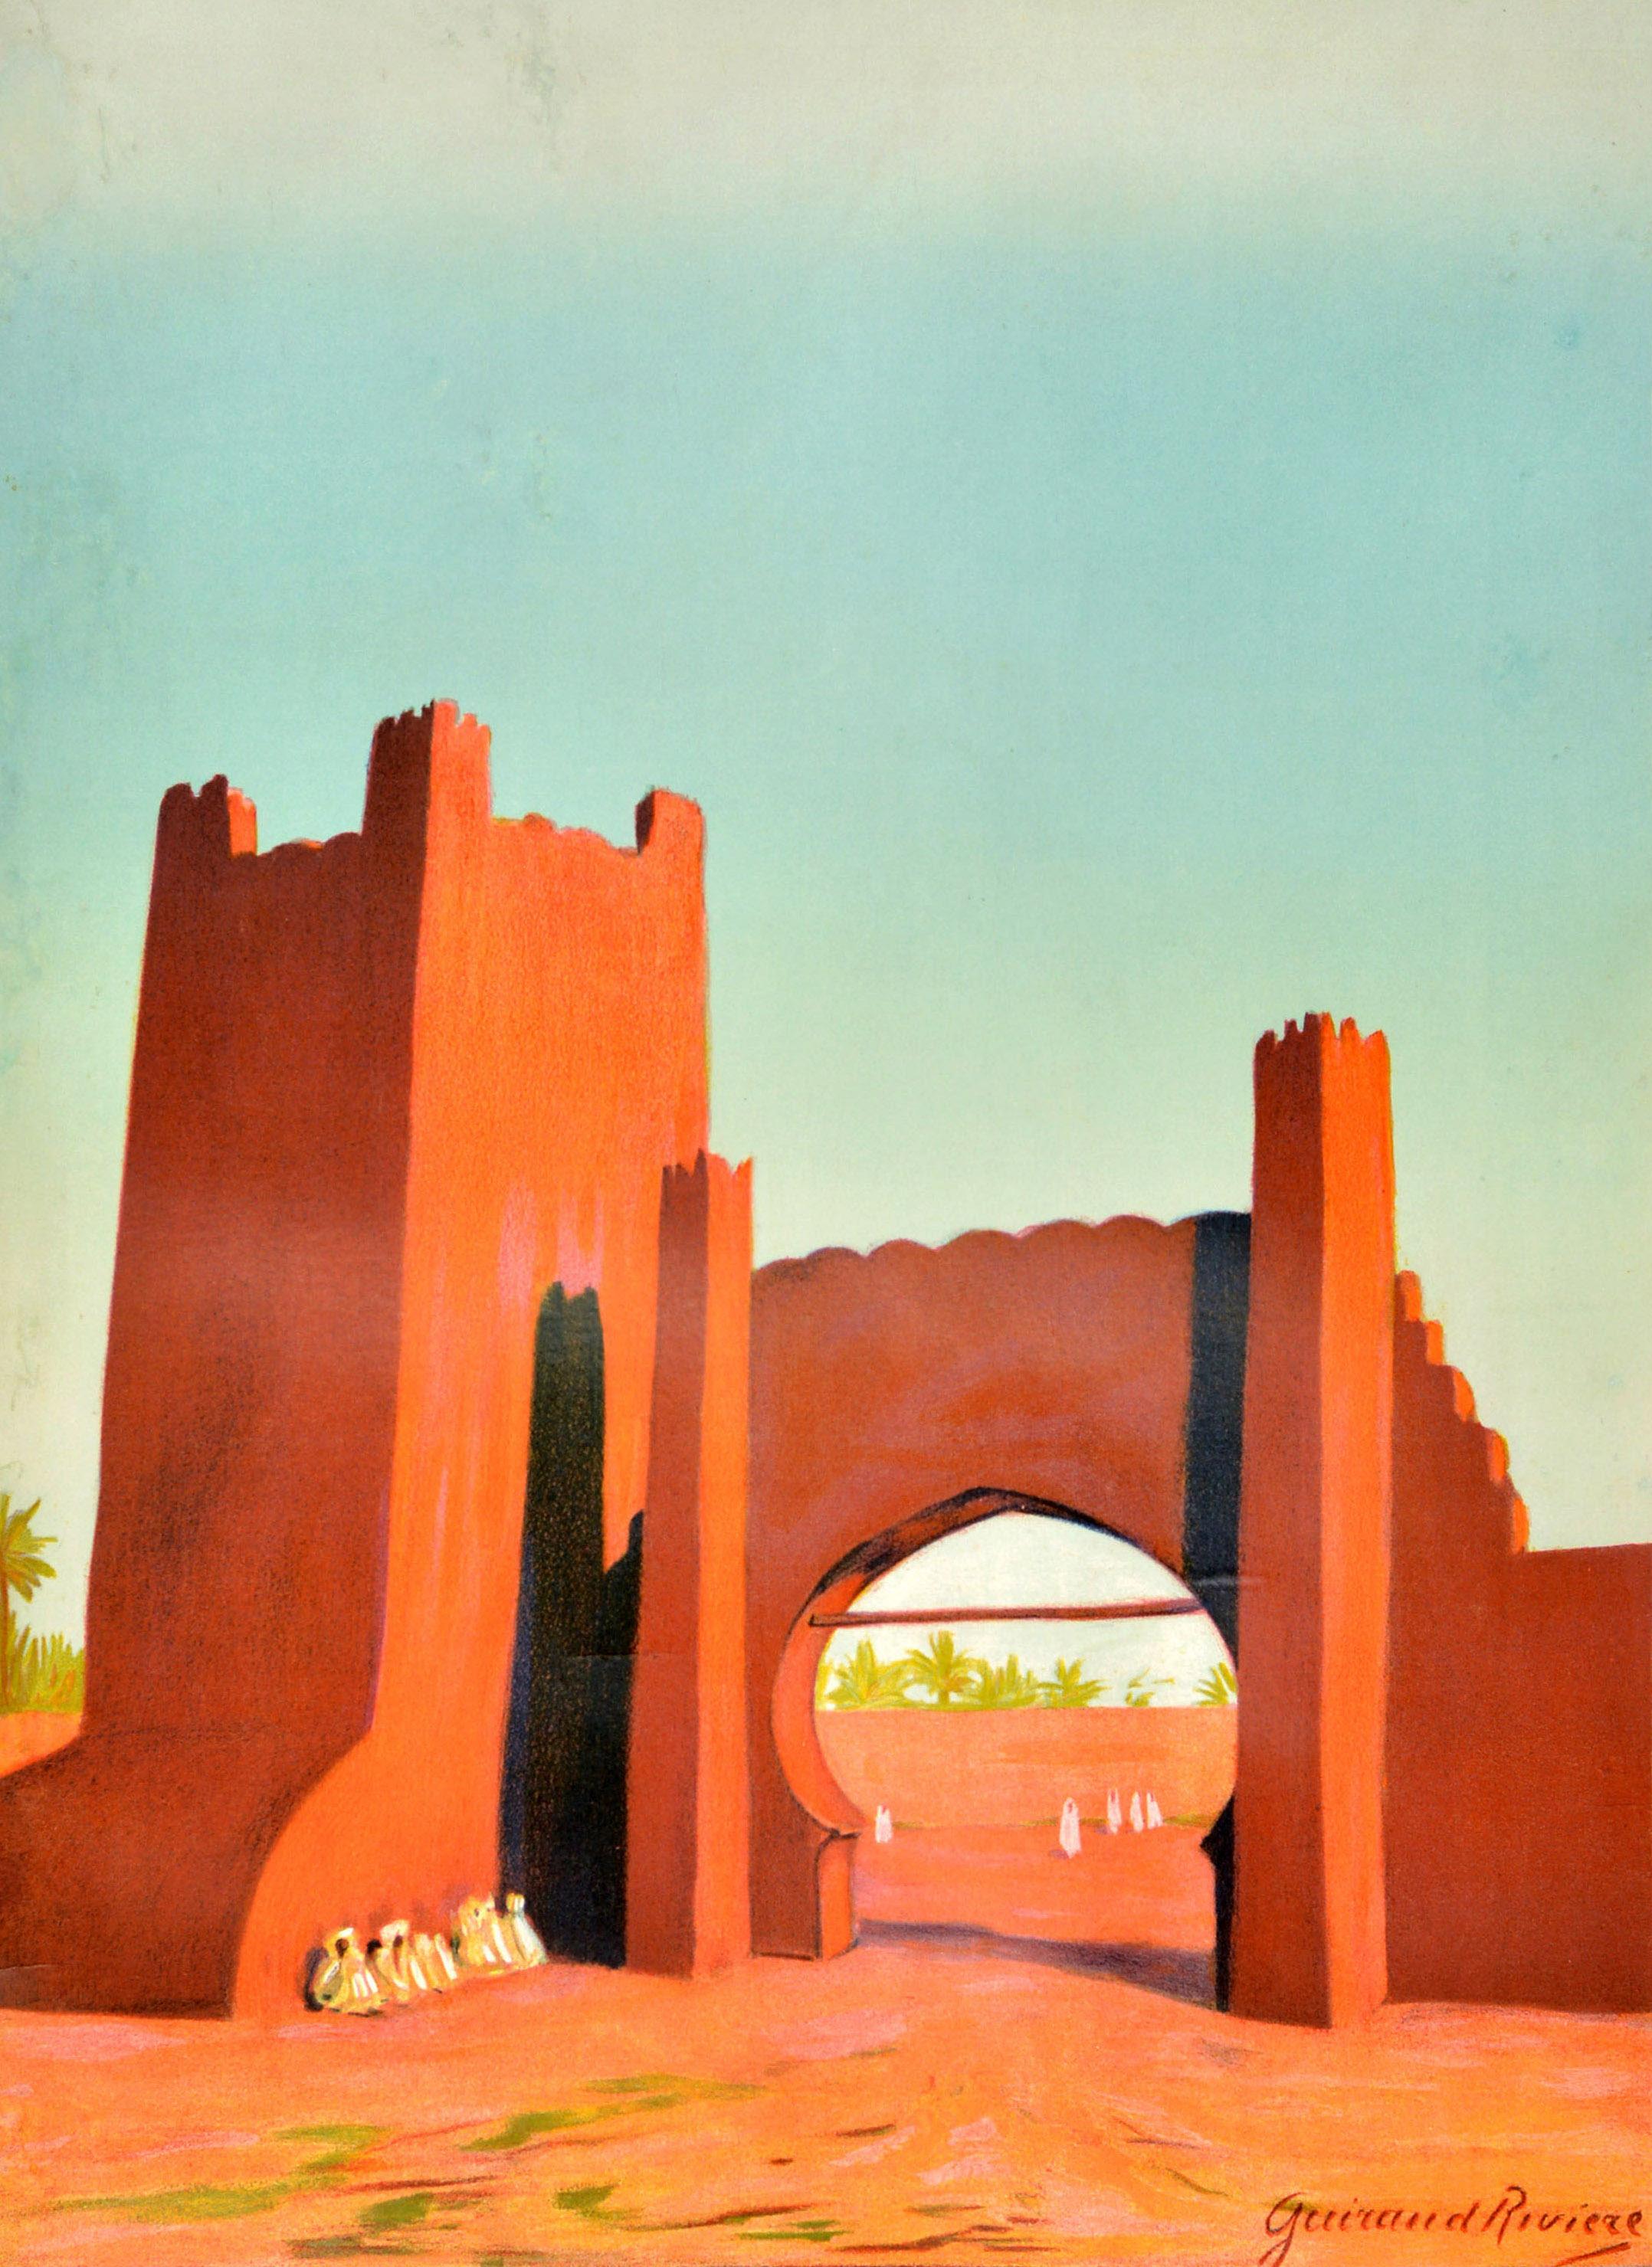 Original vintage train travel poster - Chemins de Fer du Maroc - featuring a stunning image by the poster designer and sculptor Maurice Guiraud-Riviere (1881-1967) depicting people sitting by the side of a city wall tower and more people in white